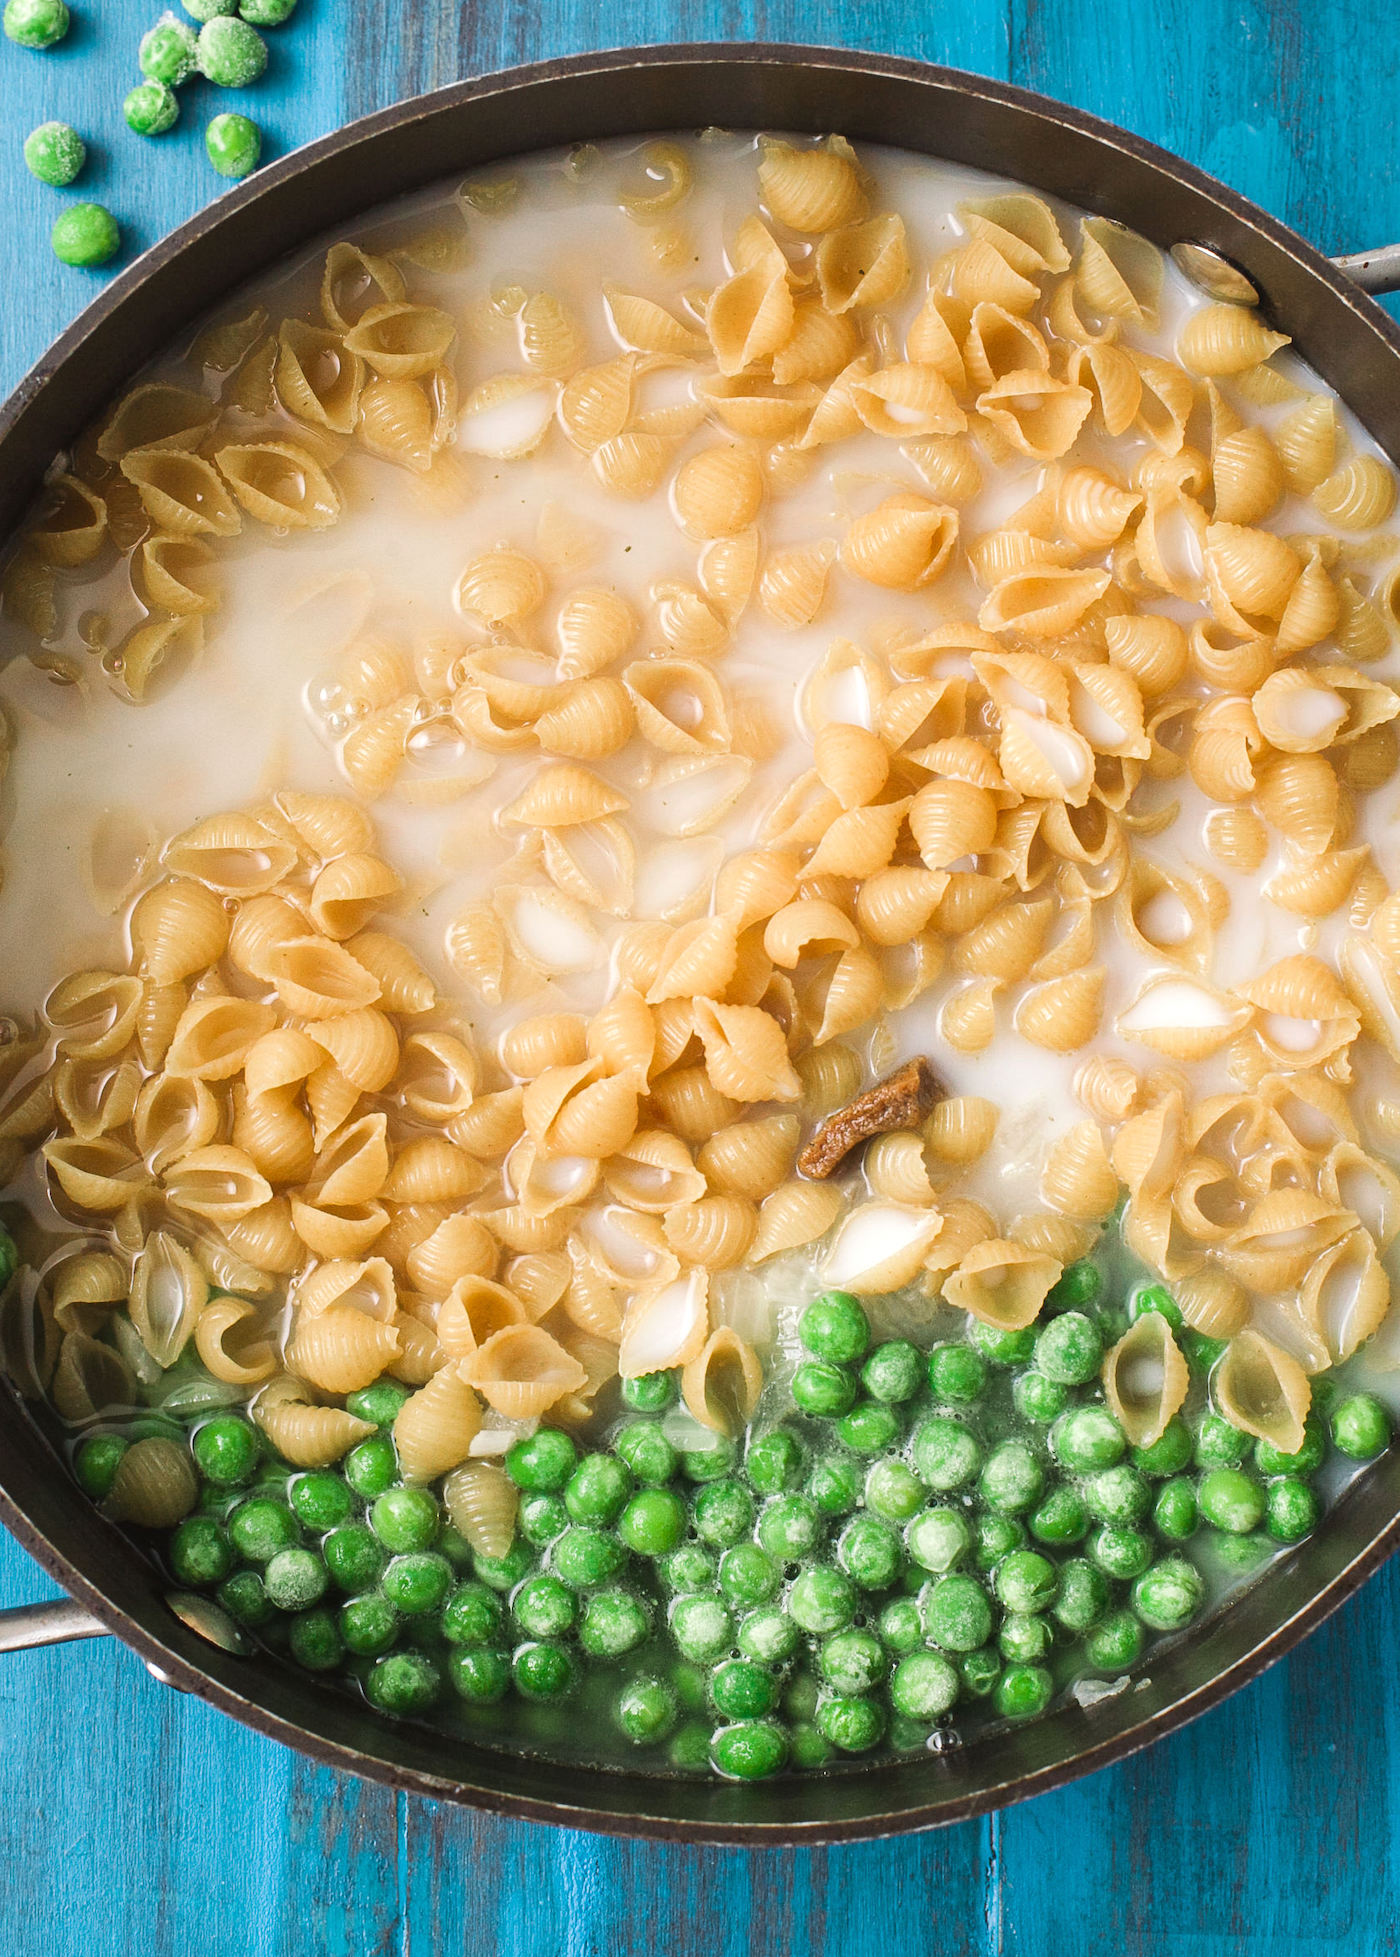 Add the pasta and peas to the pan